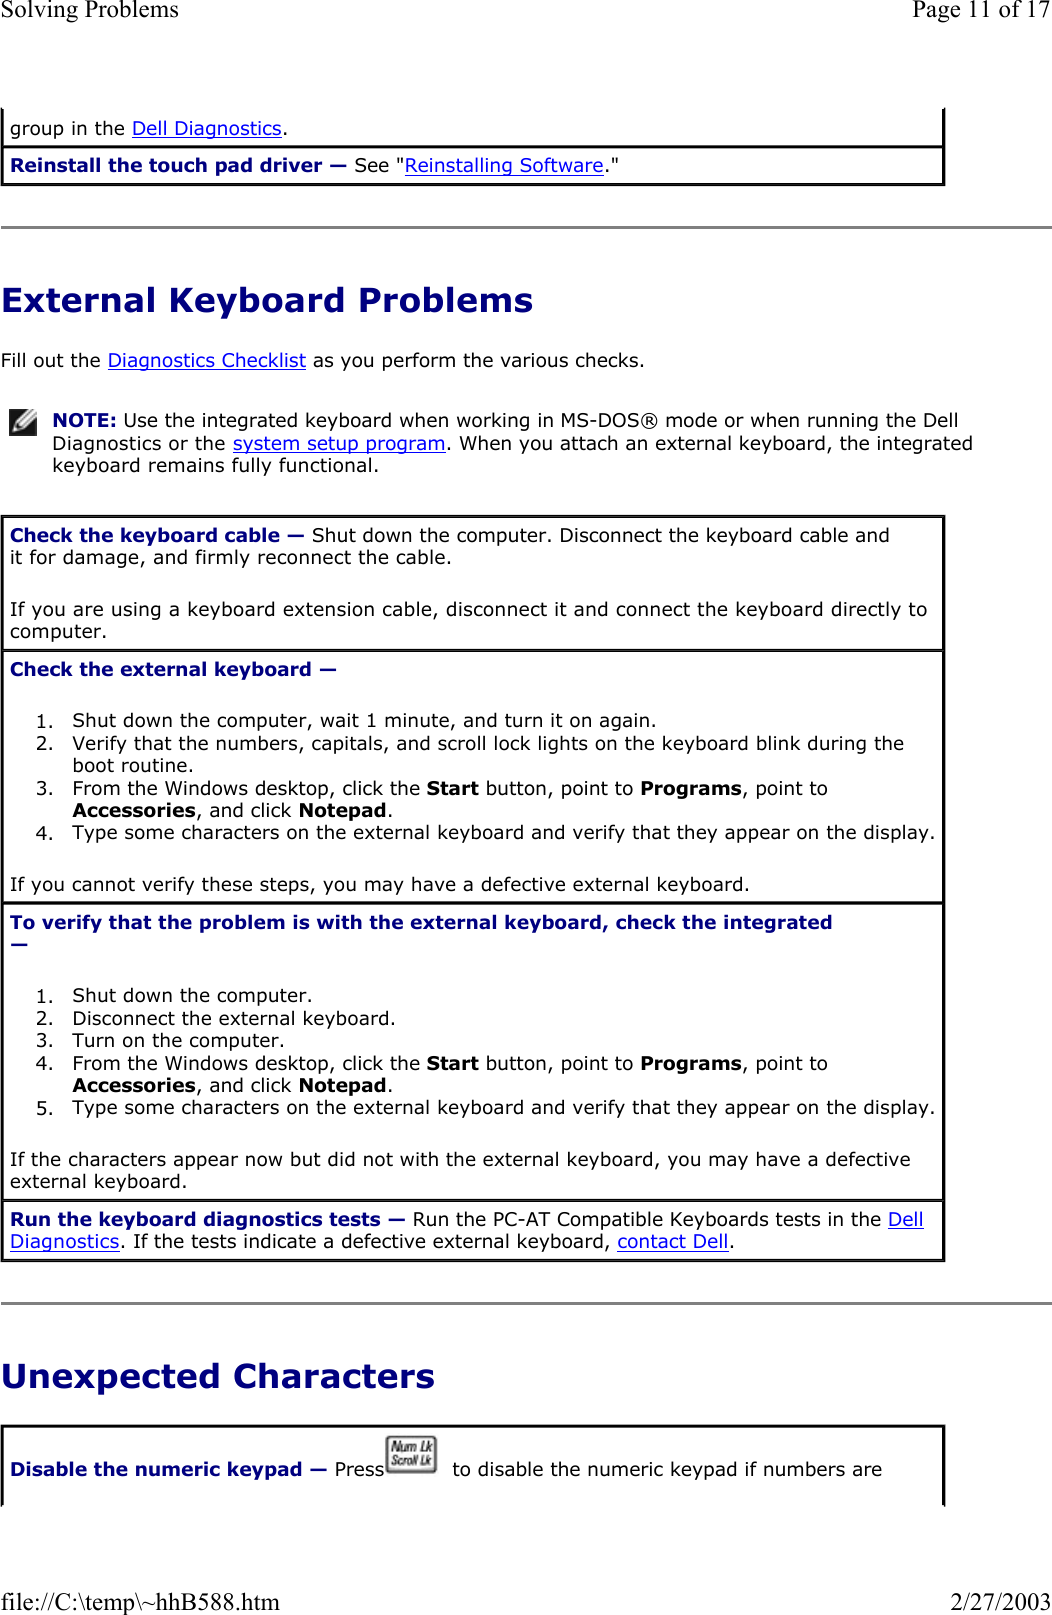 External Keyboard Problems Fill out the Diagnostics Checklist as you perform the various checks. Unexpected Characters group in the Dell Diagnostics.  Reinstall the touch pad driver — See &quot;Reinstalling Software.&quot; NOTE: Use the integrated keyboard when working in MS-DOS® mode or when running the Dell Diagnostics or the system setup program. When you attach an external keyboard, the integrated keyboard remains fully functional.Check the keyboard cable — Shut down the computer. Disconnect the keyboard cable and it for damage, and firmly reconnect the cable. If you are using a keyboard extension cable, disconnect it and connect the keyboard directly to computer. Check the external keyboard —  1. Shut down the computer, wait 1 minute, and turn it on again.  2. Verify that the numbers, capitals, and scroll lock lights on the keyboard blink during the boot routine.  3. From the Windows desktop, click the Start button, point to Programs, point to Accessories, and click Notepad.  4. Type some characters on the external keyboard and verify that they appear on the display. If you cannot verify these steps, you may have a defective external keyboard.  To verify that the problem is with the external keyboard, check the integrated —  1. Shut down the computer.  2. Disconnect the external keyboard.  3. Turn on the computer.  4. From the Windows desktop, click the Start button, point to Programs, point to Accessories, and click Notepad.  5. Type some characters on the external keyboard and verify that they appear on the display. If the characters appear now but did not with the external keyboard, you may have a defective external keyboard.  Run the keyboard diagnostics tests — Run the PC-AT Compatible Keyboards tests in the Dell Diagnostics. If the tests indicate a defective external keyboard, contact Dell. Disable the numeric keypad — Press   to disable the numeric keypad if numbers are Page 11 of 17Solving Problems2/27/2003file://C:\temp\~hhB588.htm